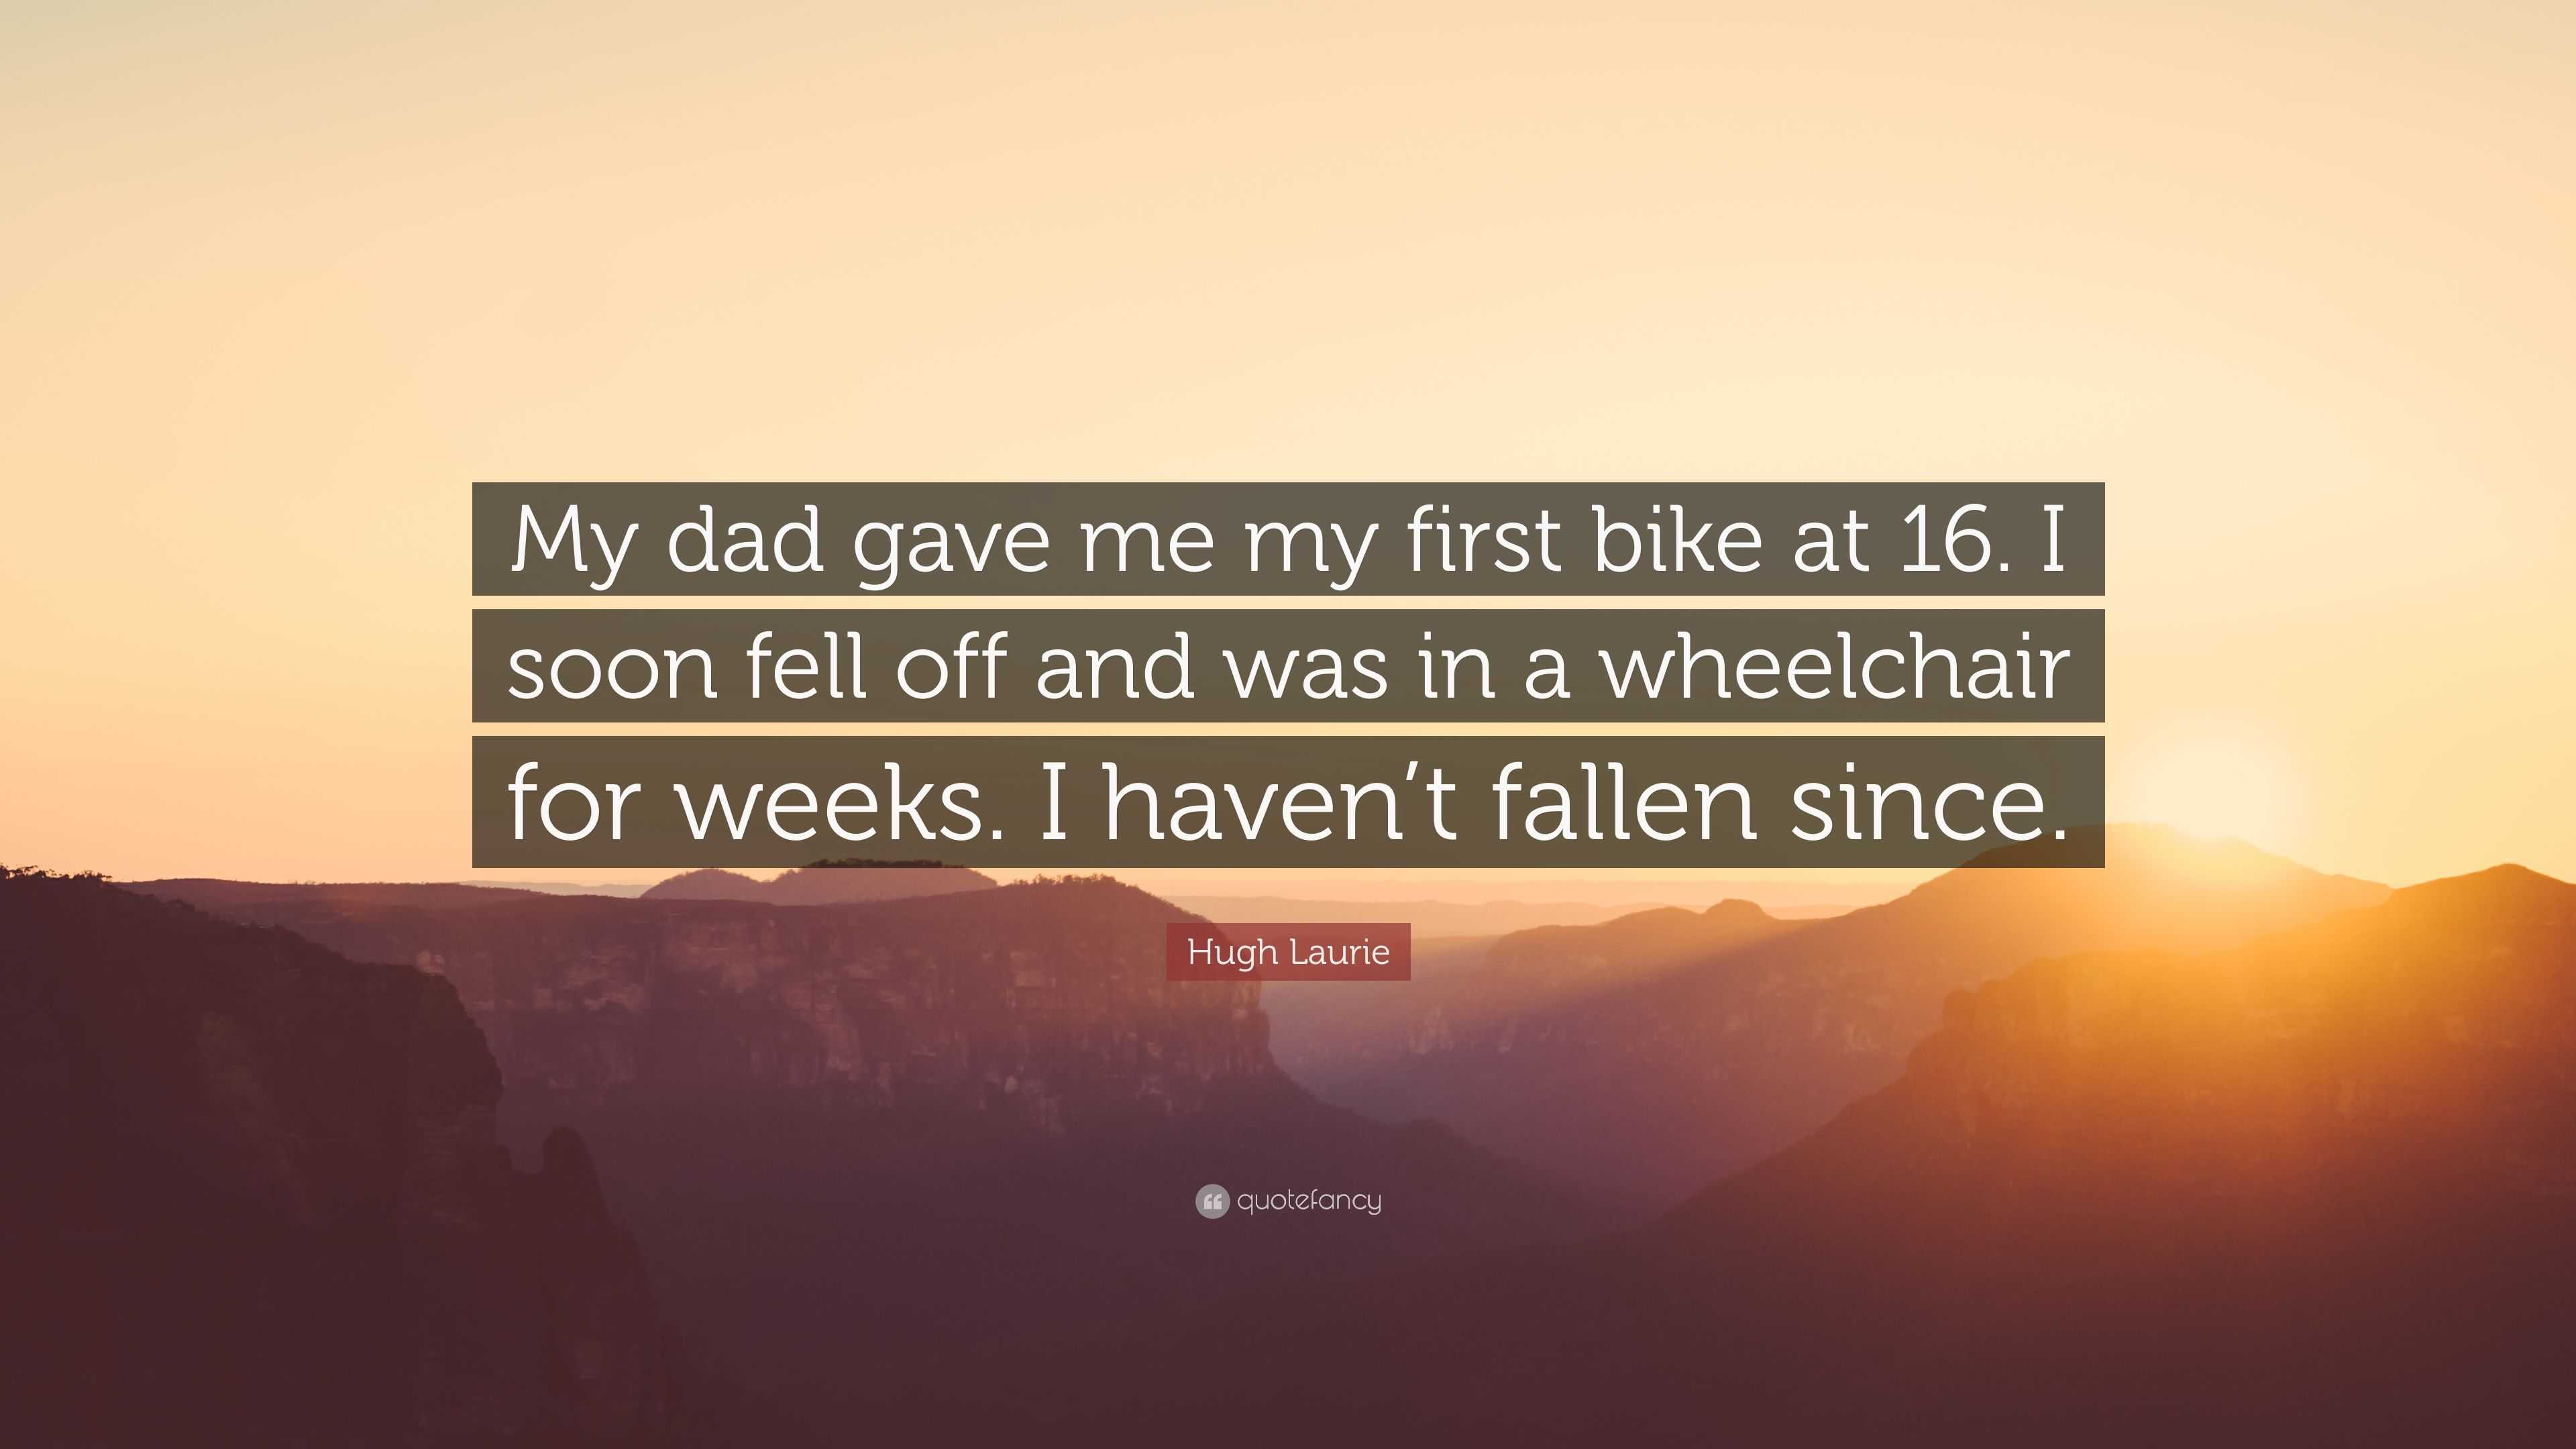 Hugh Laurie Quote: “My dad gave me my first bike at 16. I soon fell off